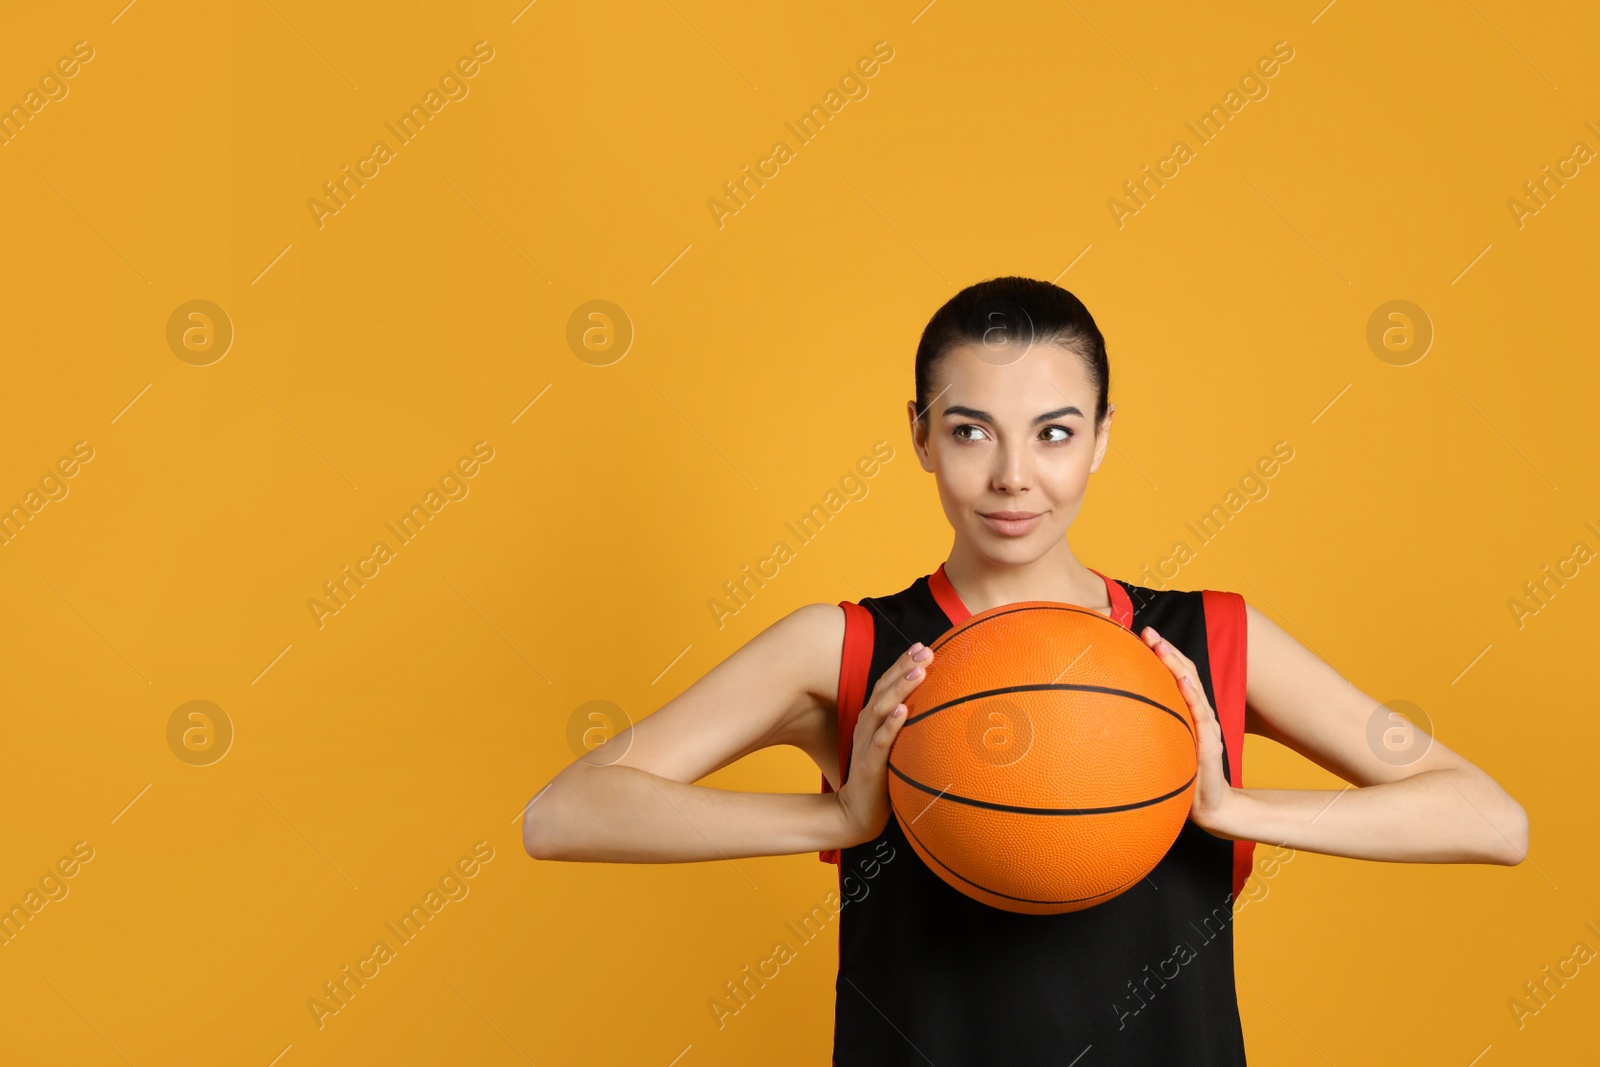 Photo of Basketball player with ball on yellow background. Space for text